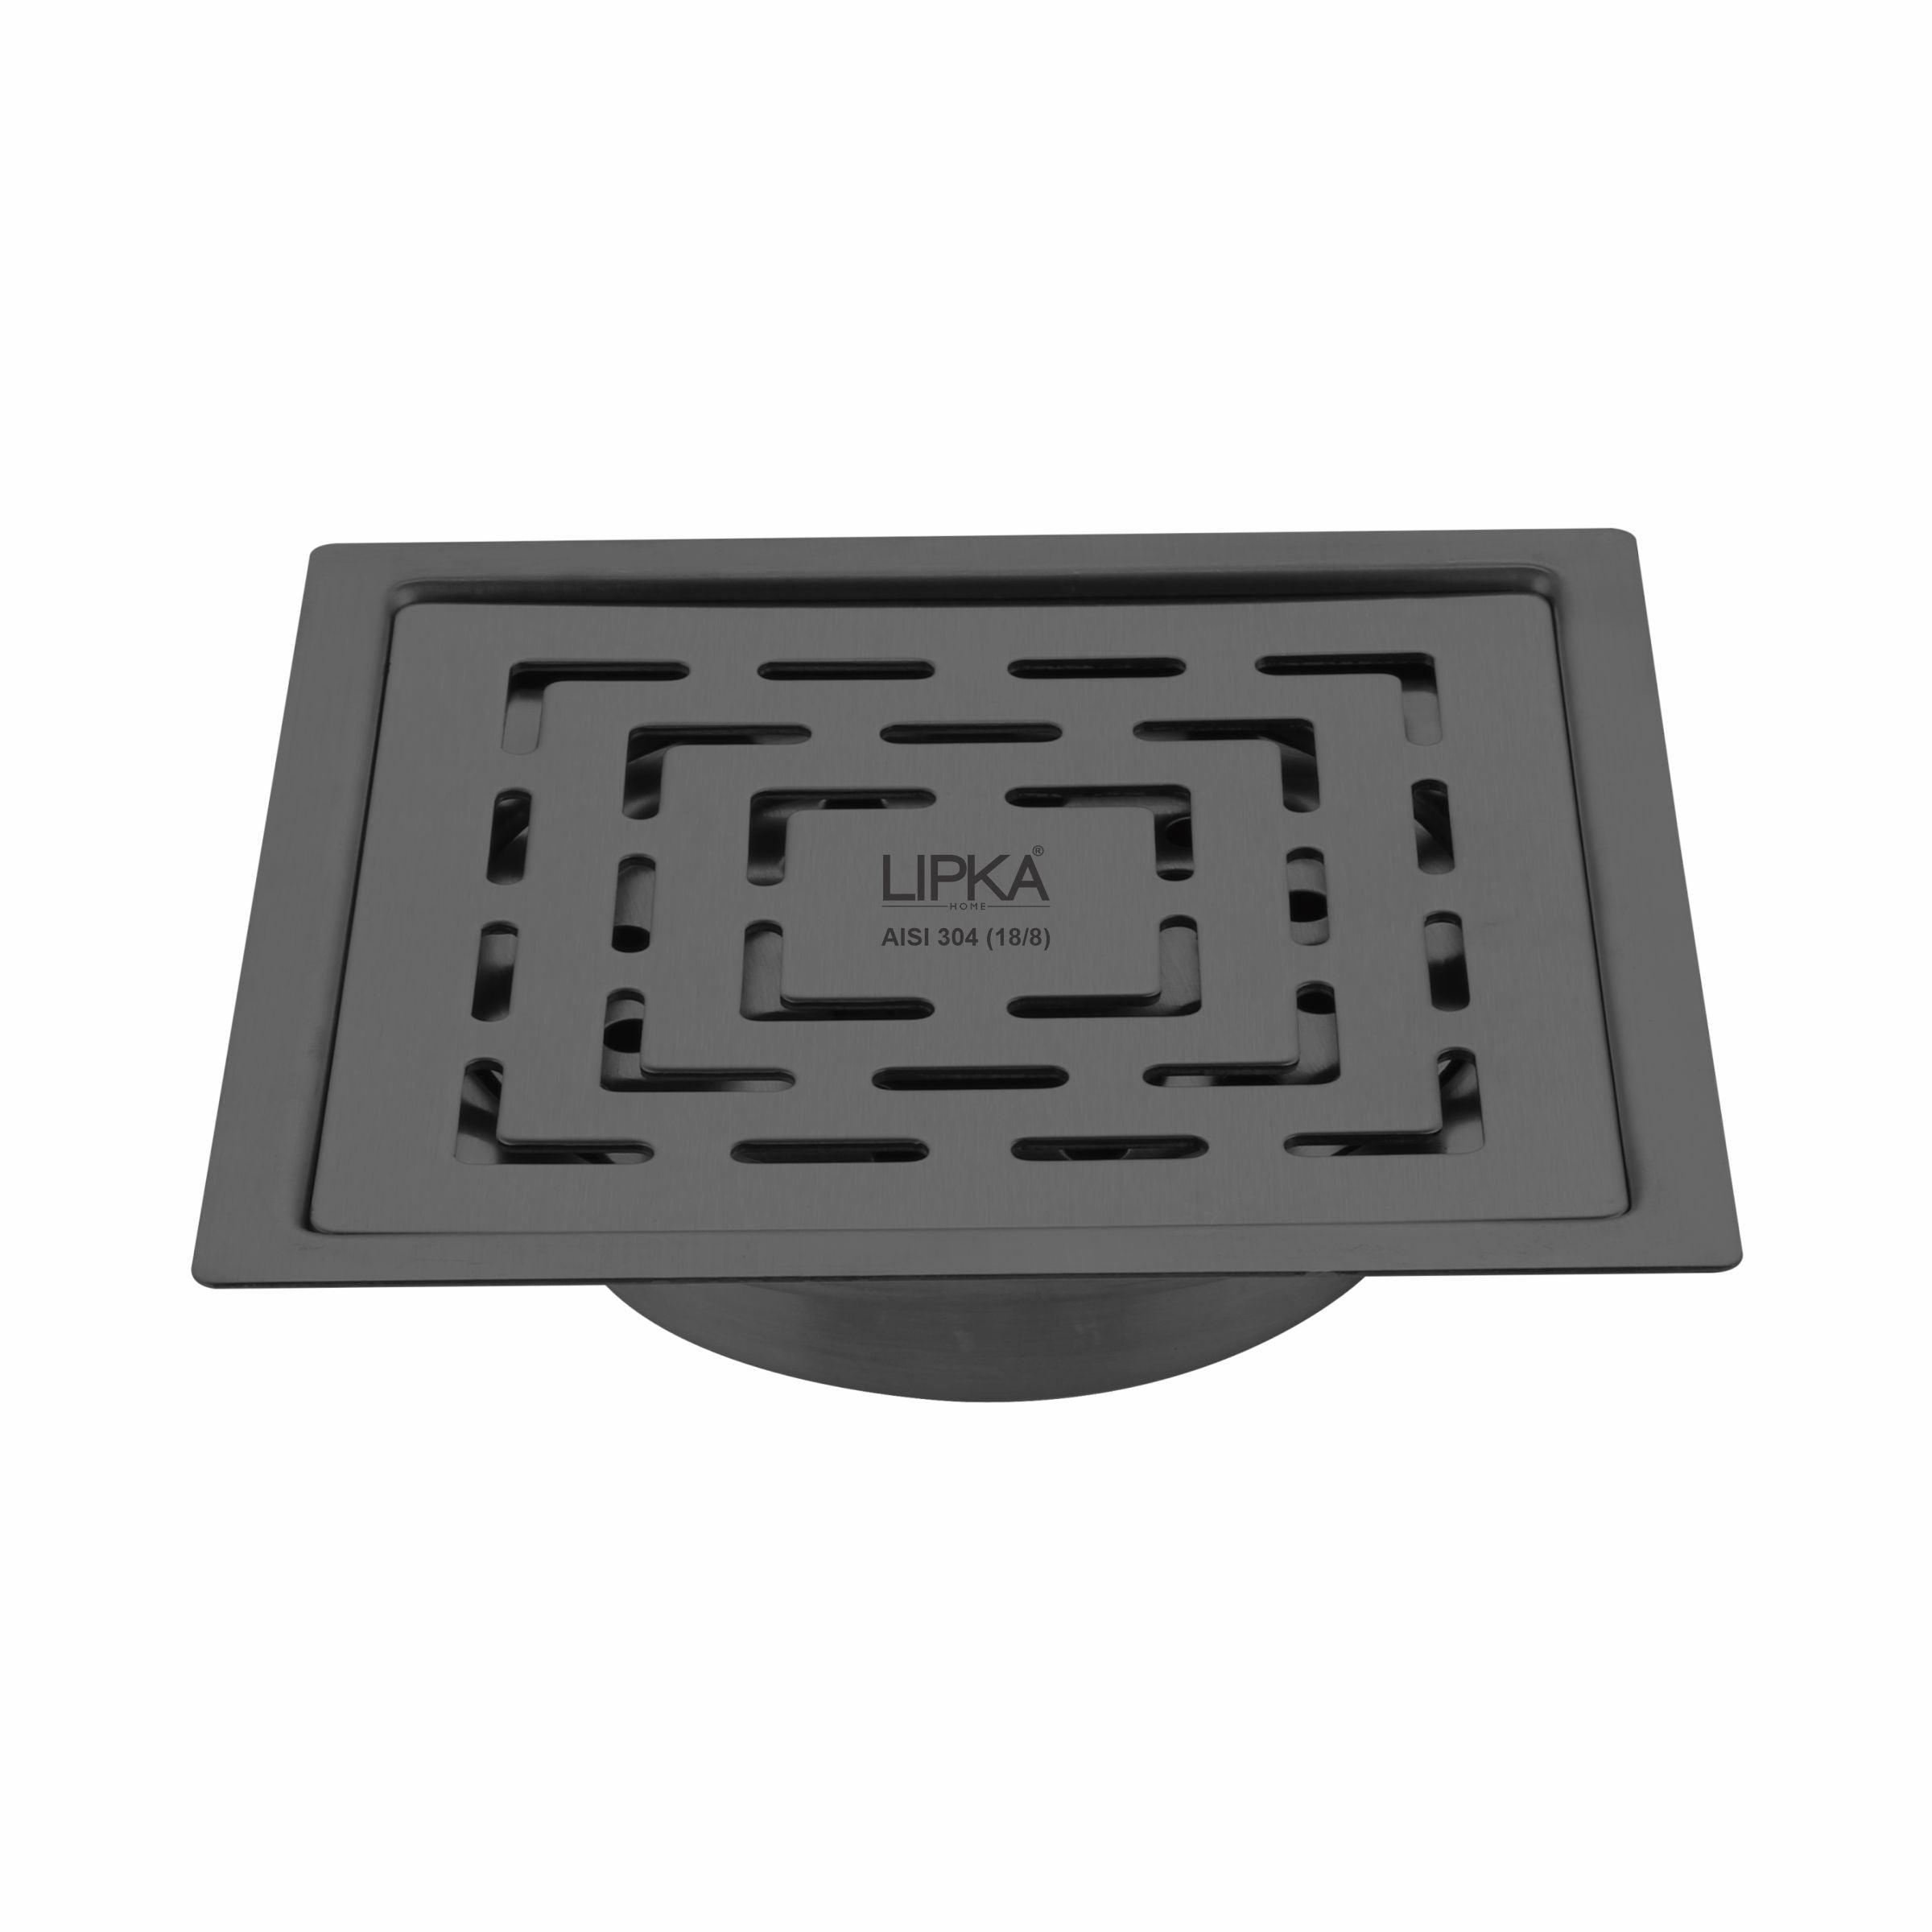 Orange Exclusive Square Flat Cut Floor Drain in Black PVD Coating (5 x 5 Inches) with Cockroach Trap